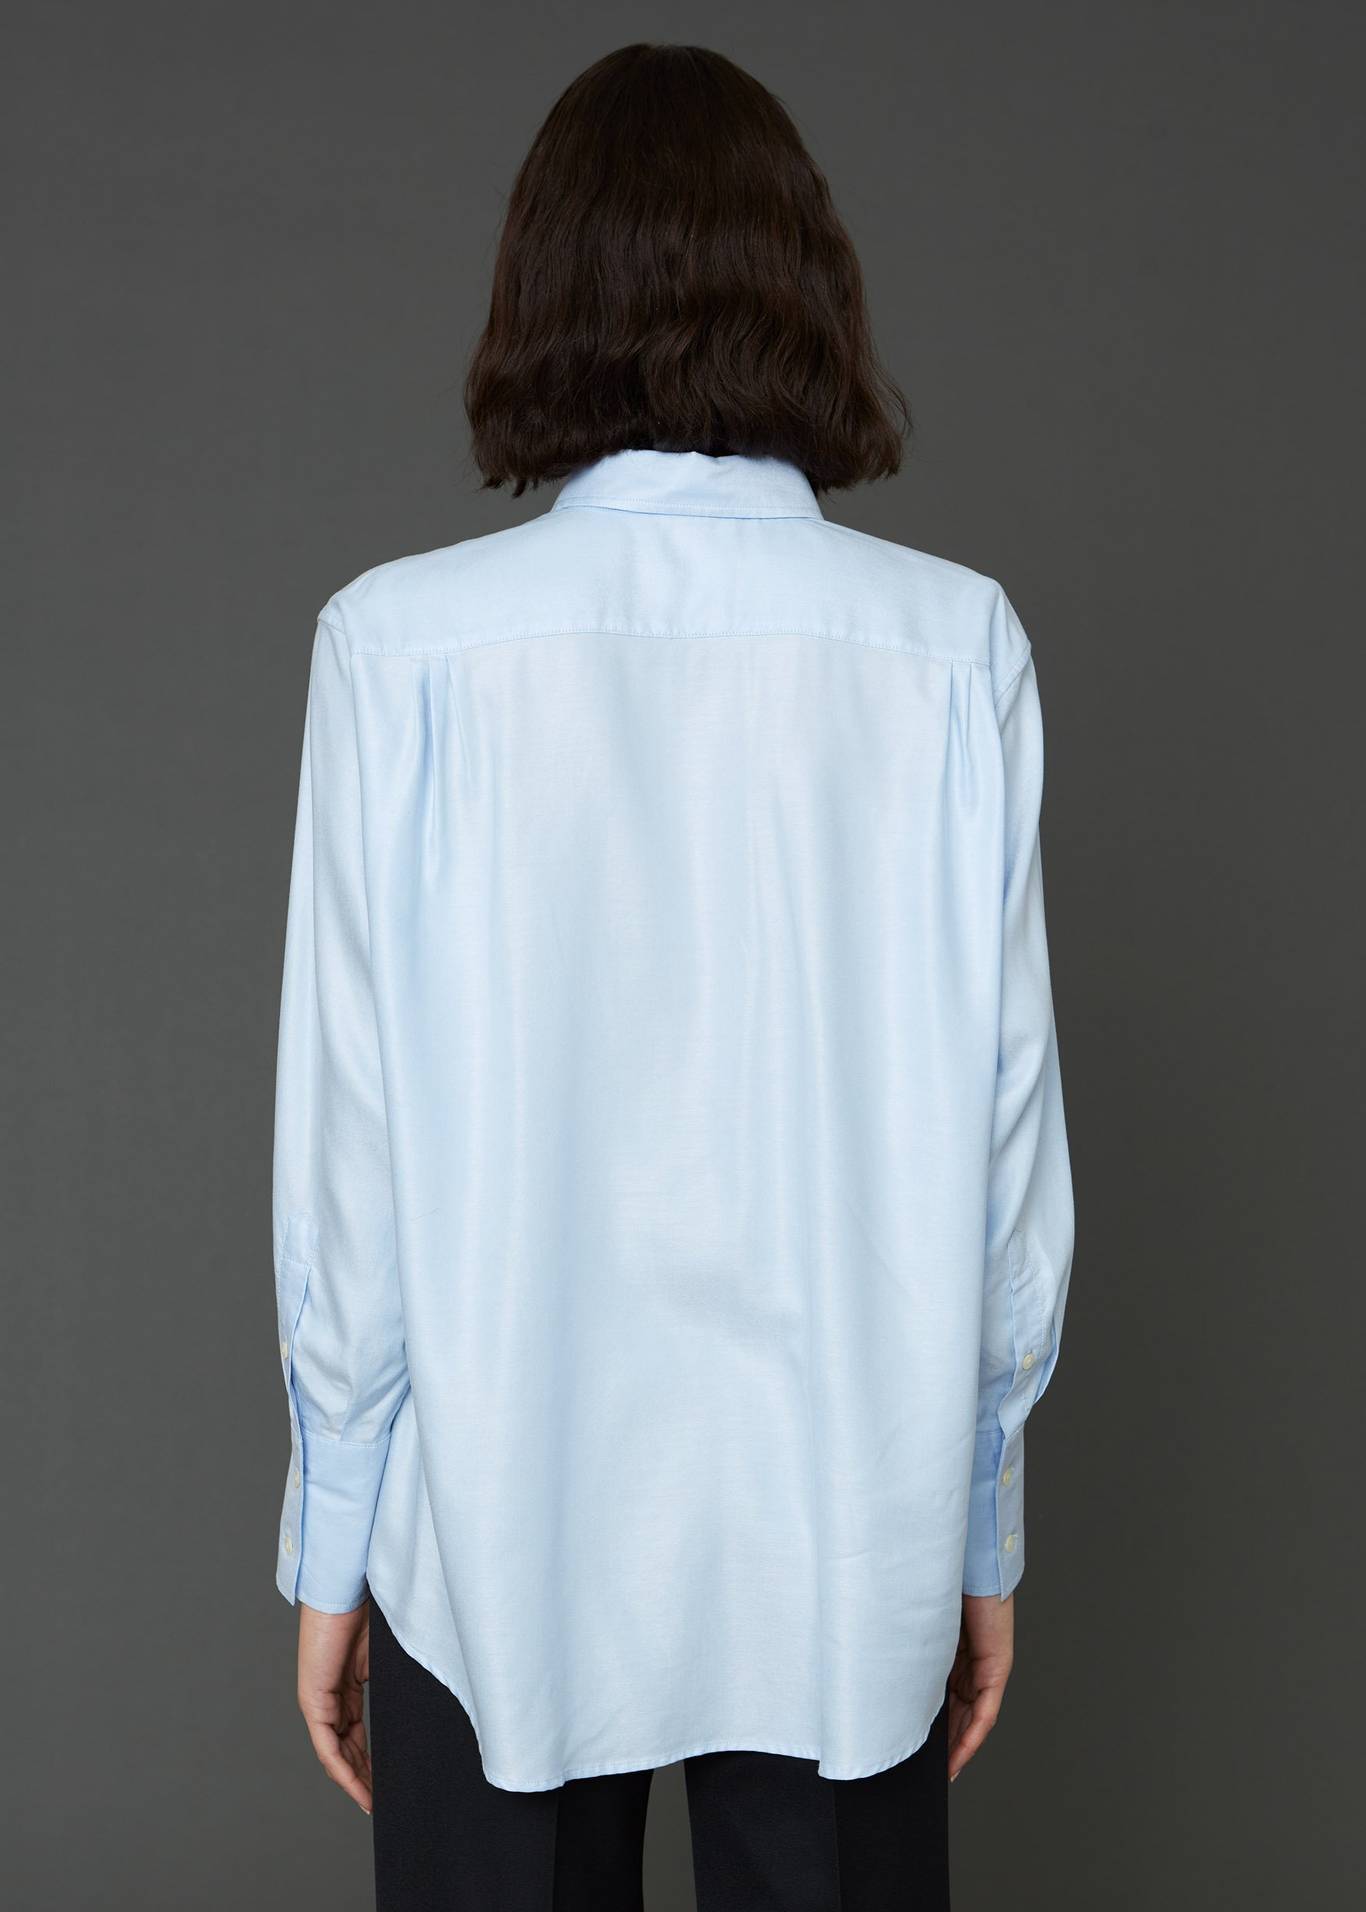 Trip shirt in blue by Hope